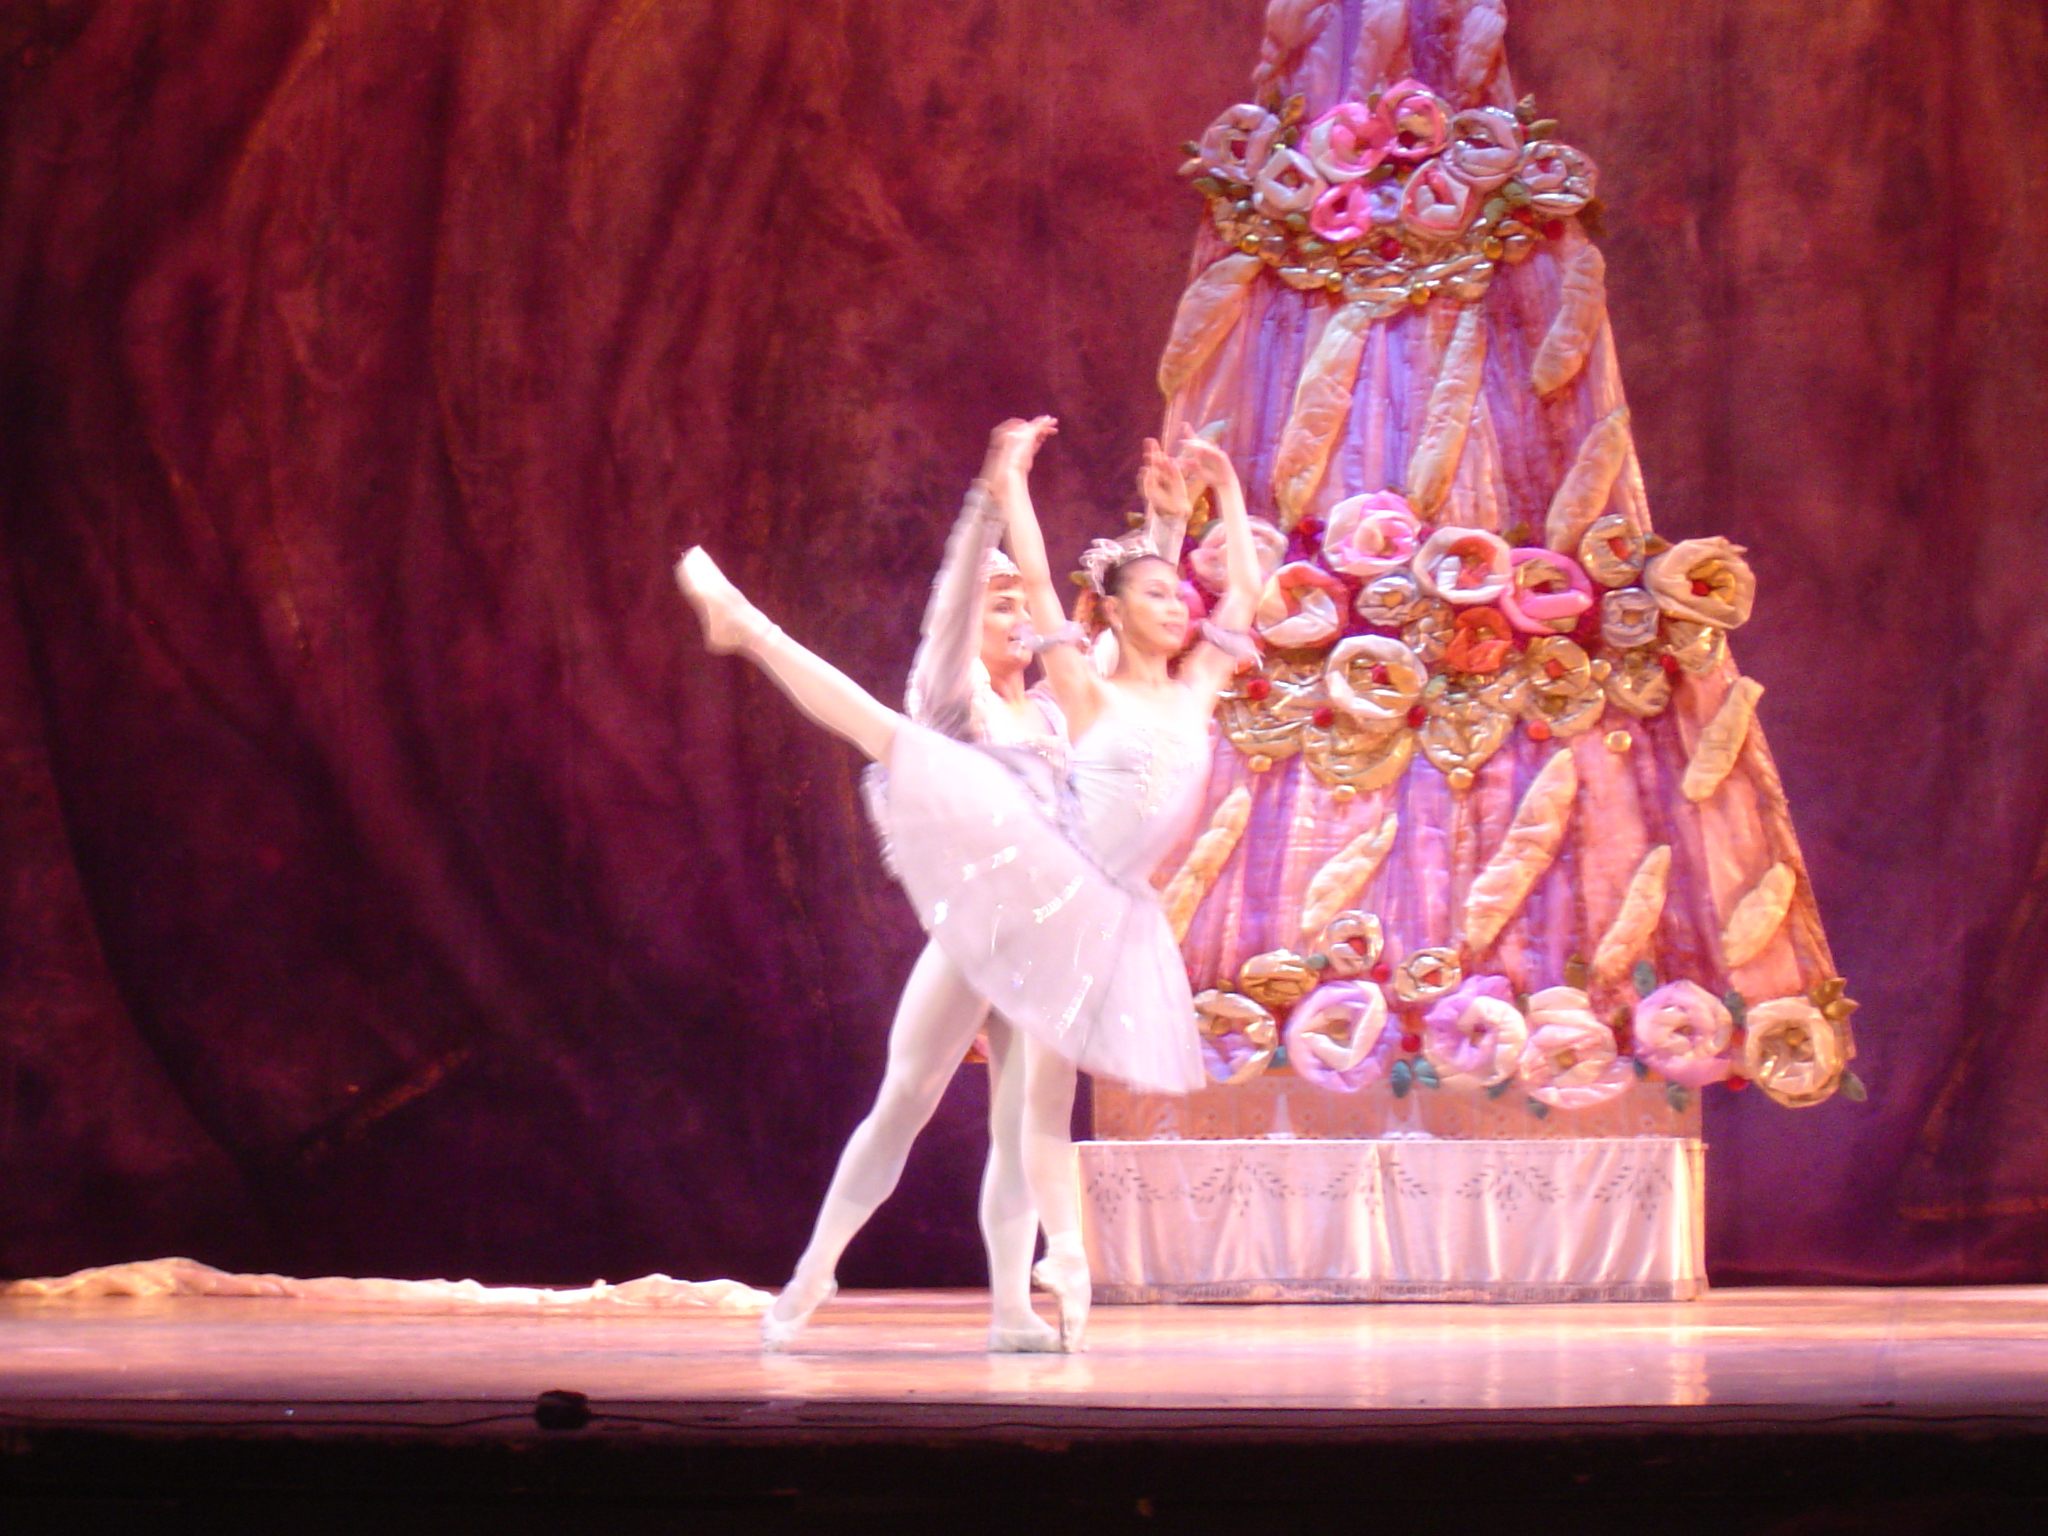 two ballet dancers on stage in front of a large prop cake